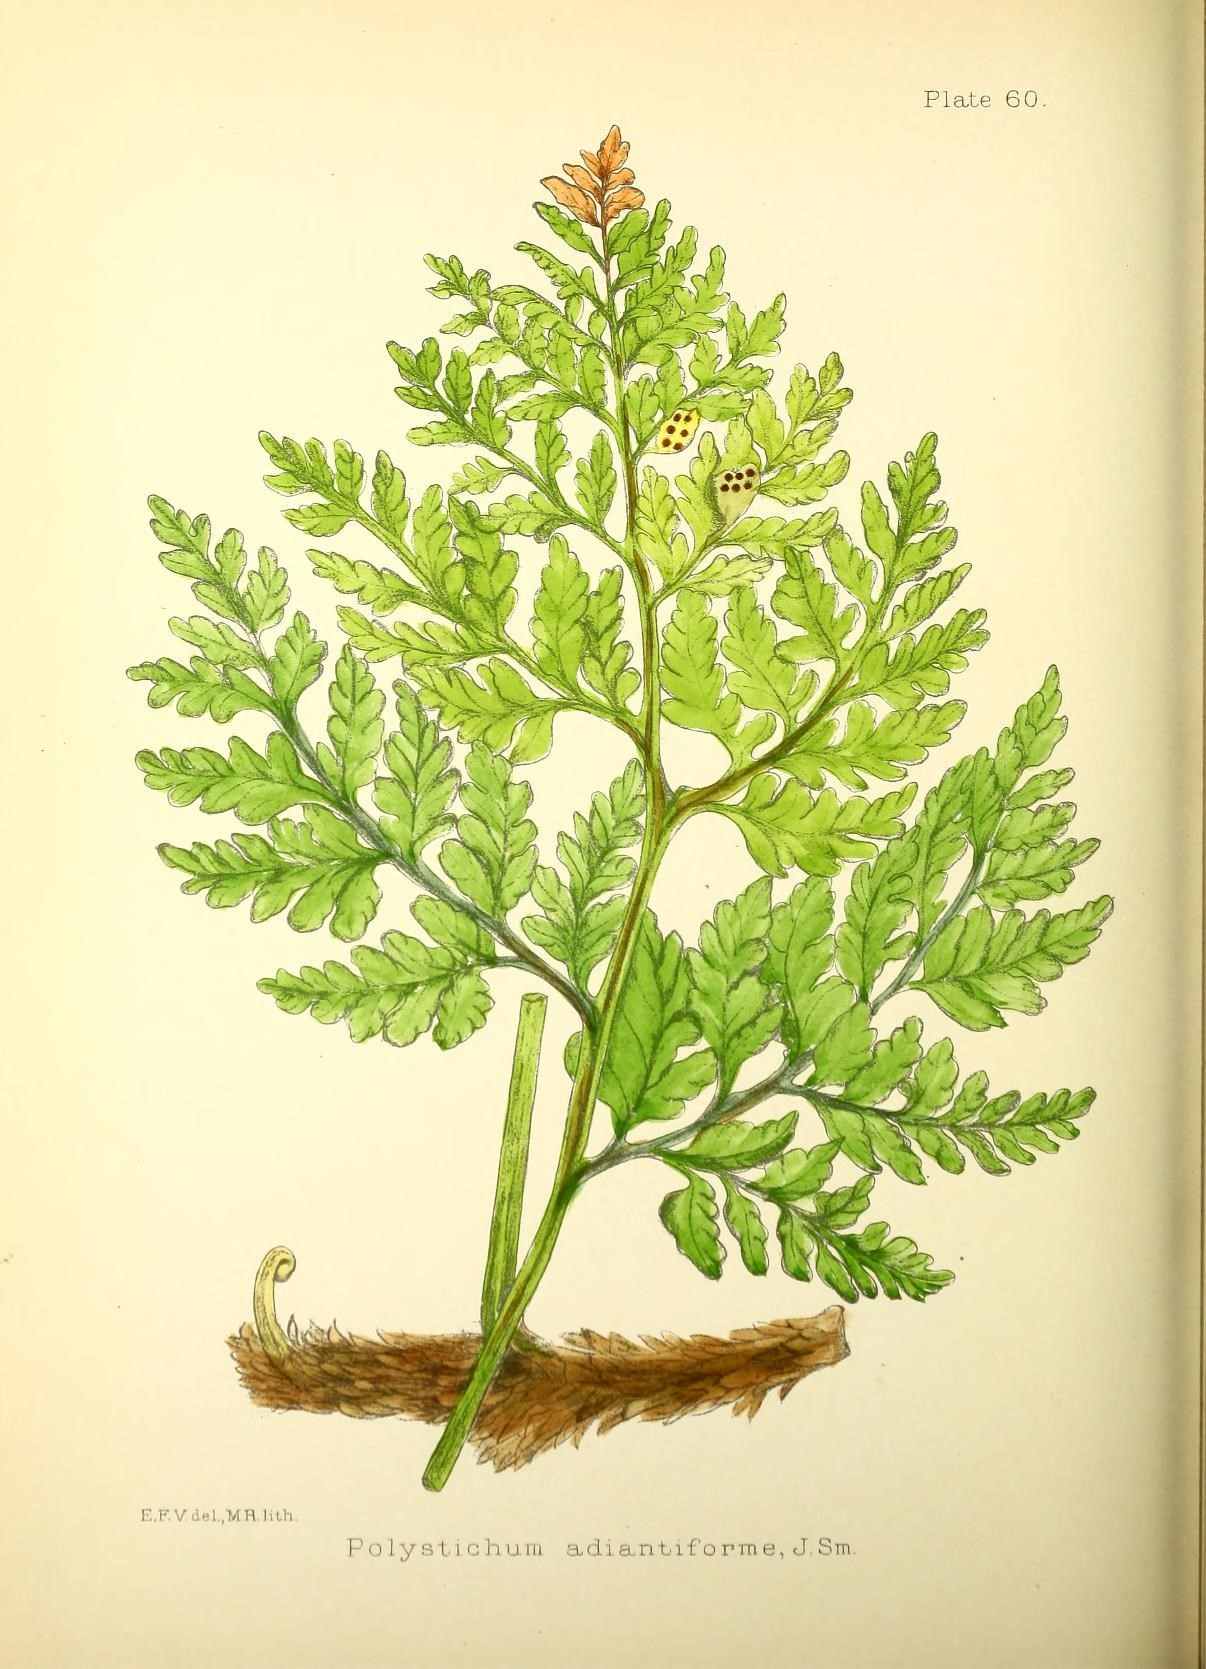 an illustration of a green plant in a book